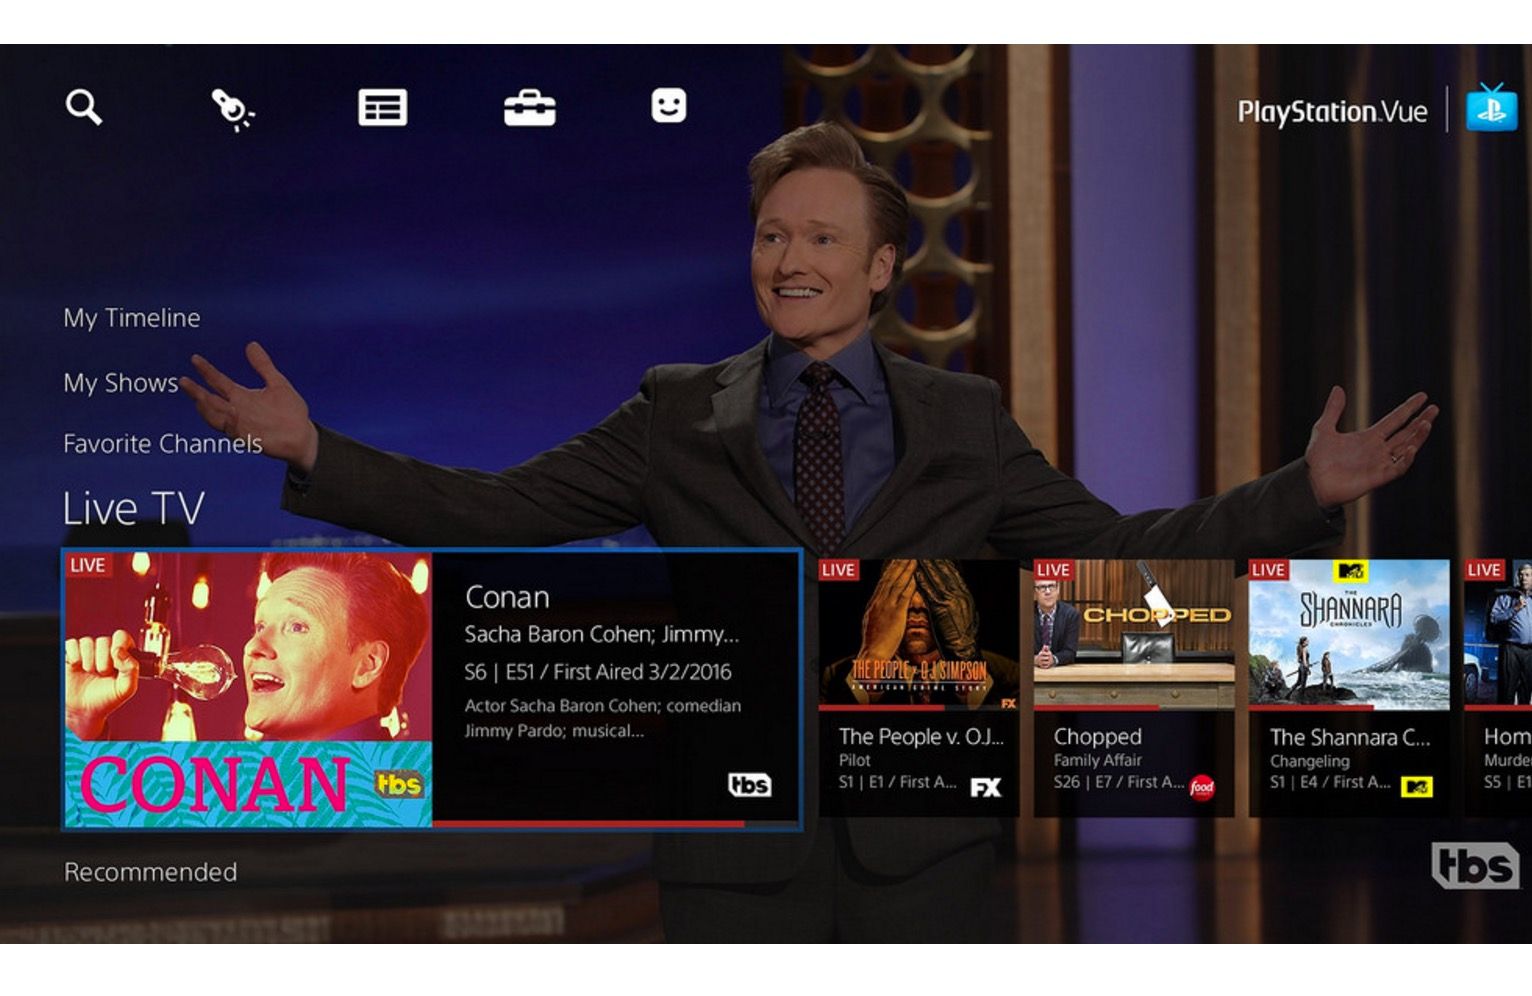 sony playstation vue is finally now available across the us image 1